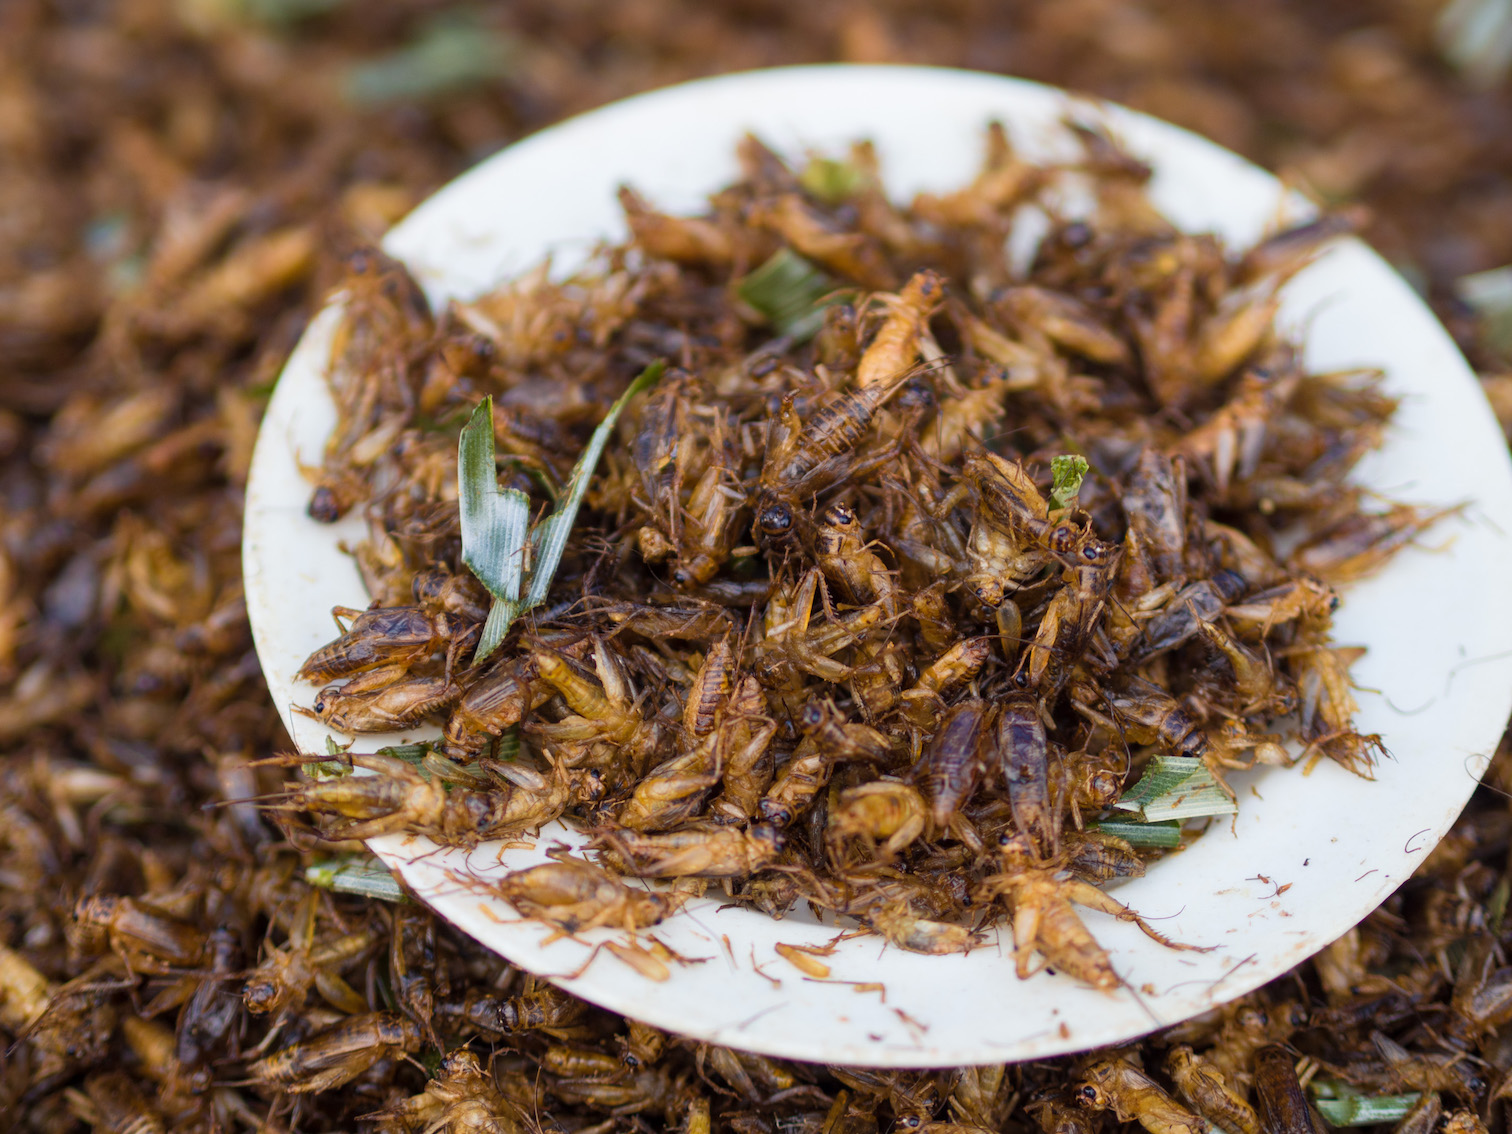 More steak for the rich: Globalists pushing for insect diet to “save the planet”